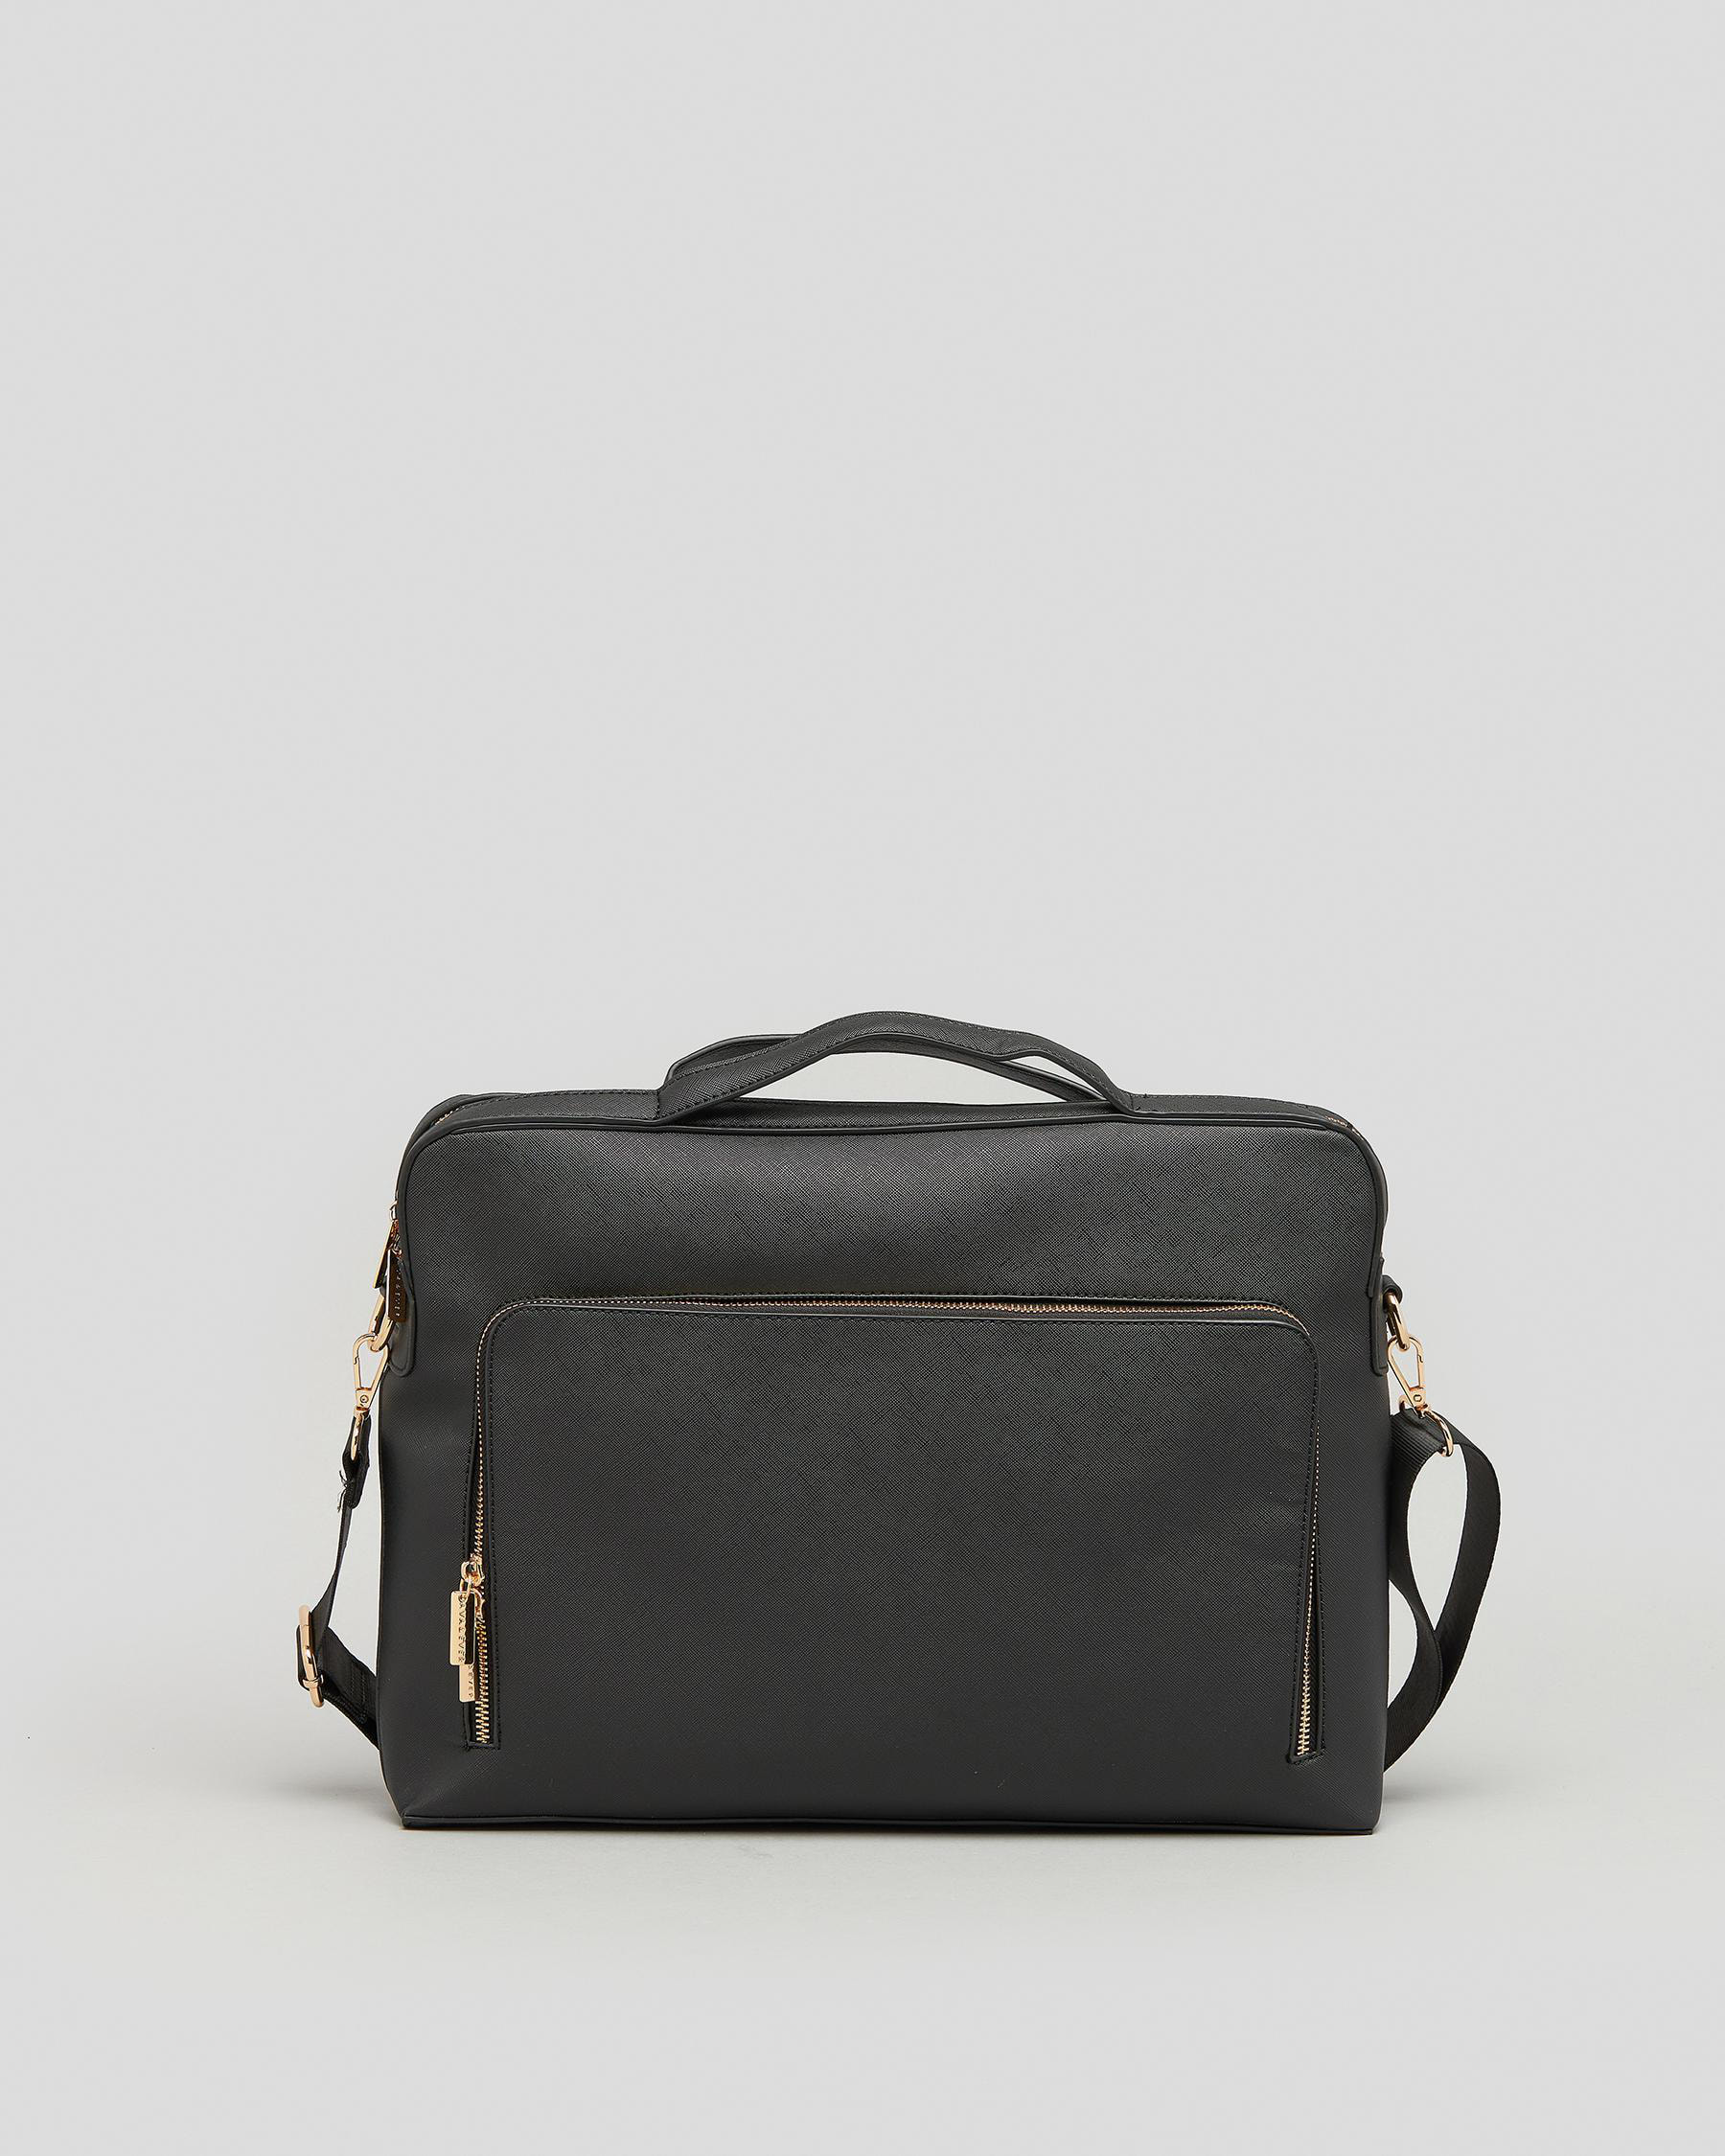 Shop Ava And Ever Miami Satchel Bag In Black - Fast Shipping & Easy ...